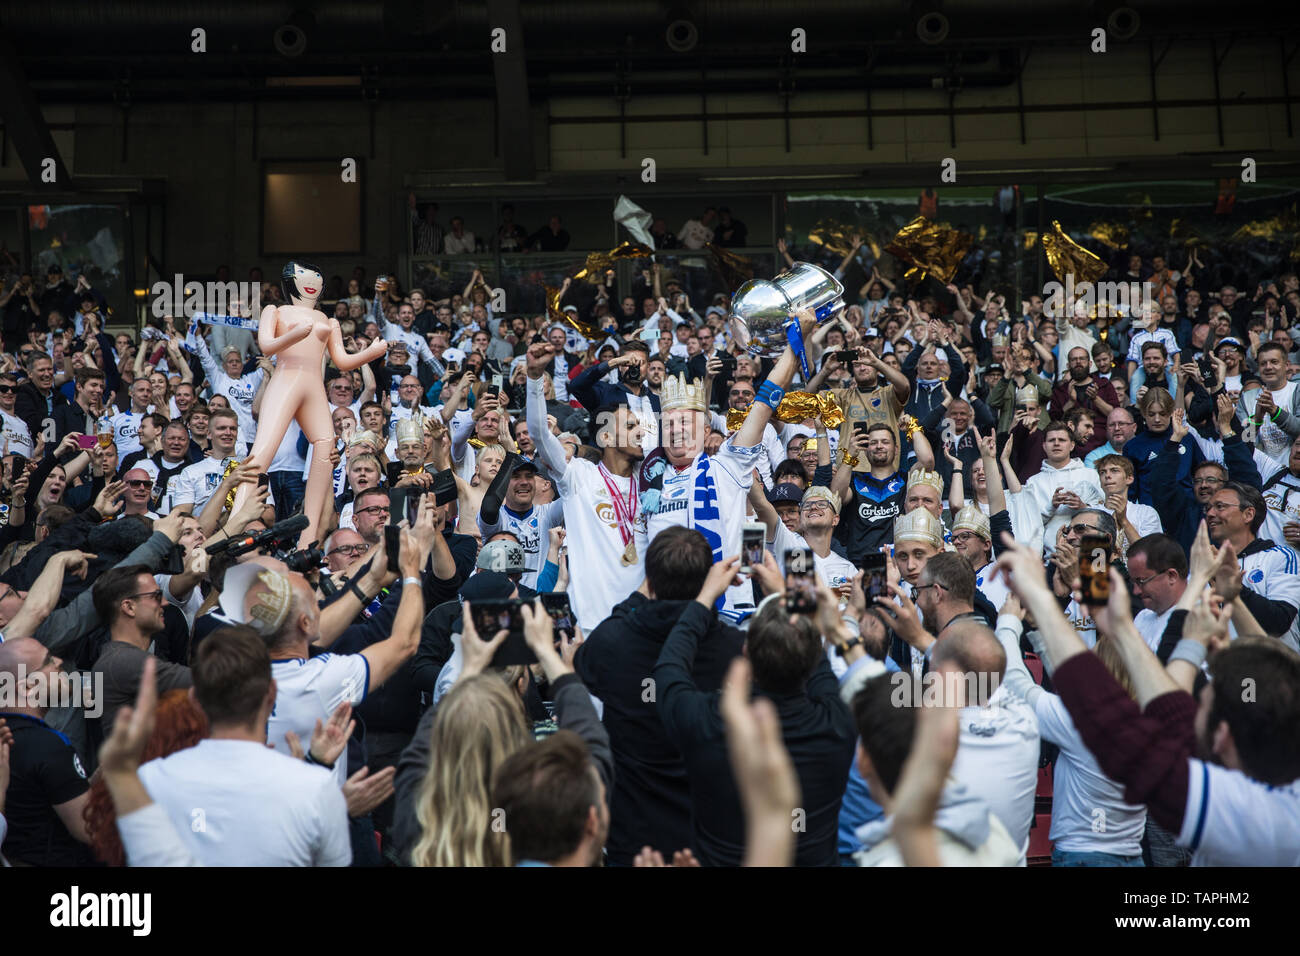 Denmark, Copenhagen, May 25, 2019. The players from FC Copenhagen win the Danish Superliga 2018-2019 home in Telia Parken. Here FC Copenhagen captain Carlos Zeca is sharing the trophy with a special selected fan. (Photo credit: Gonzales Photo - Samy Khabthani). Stock Photo